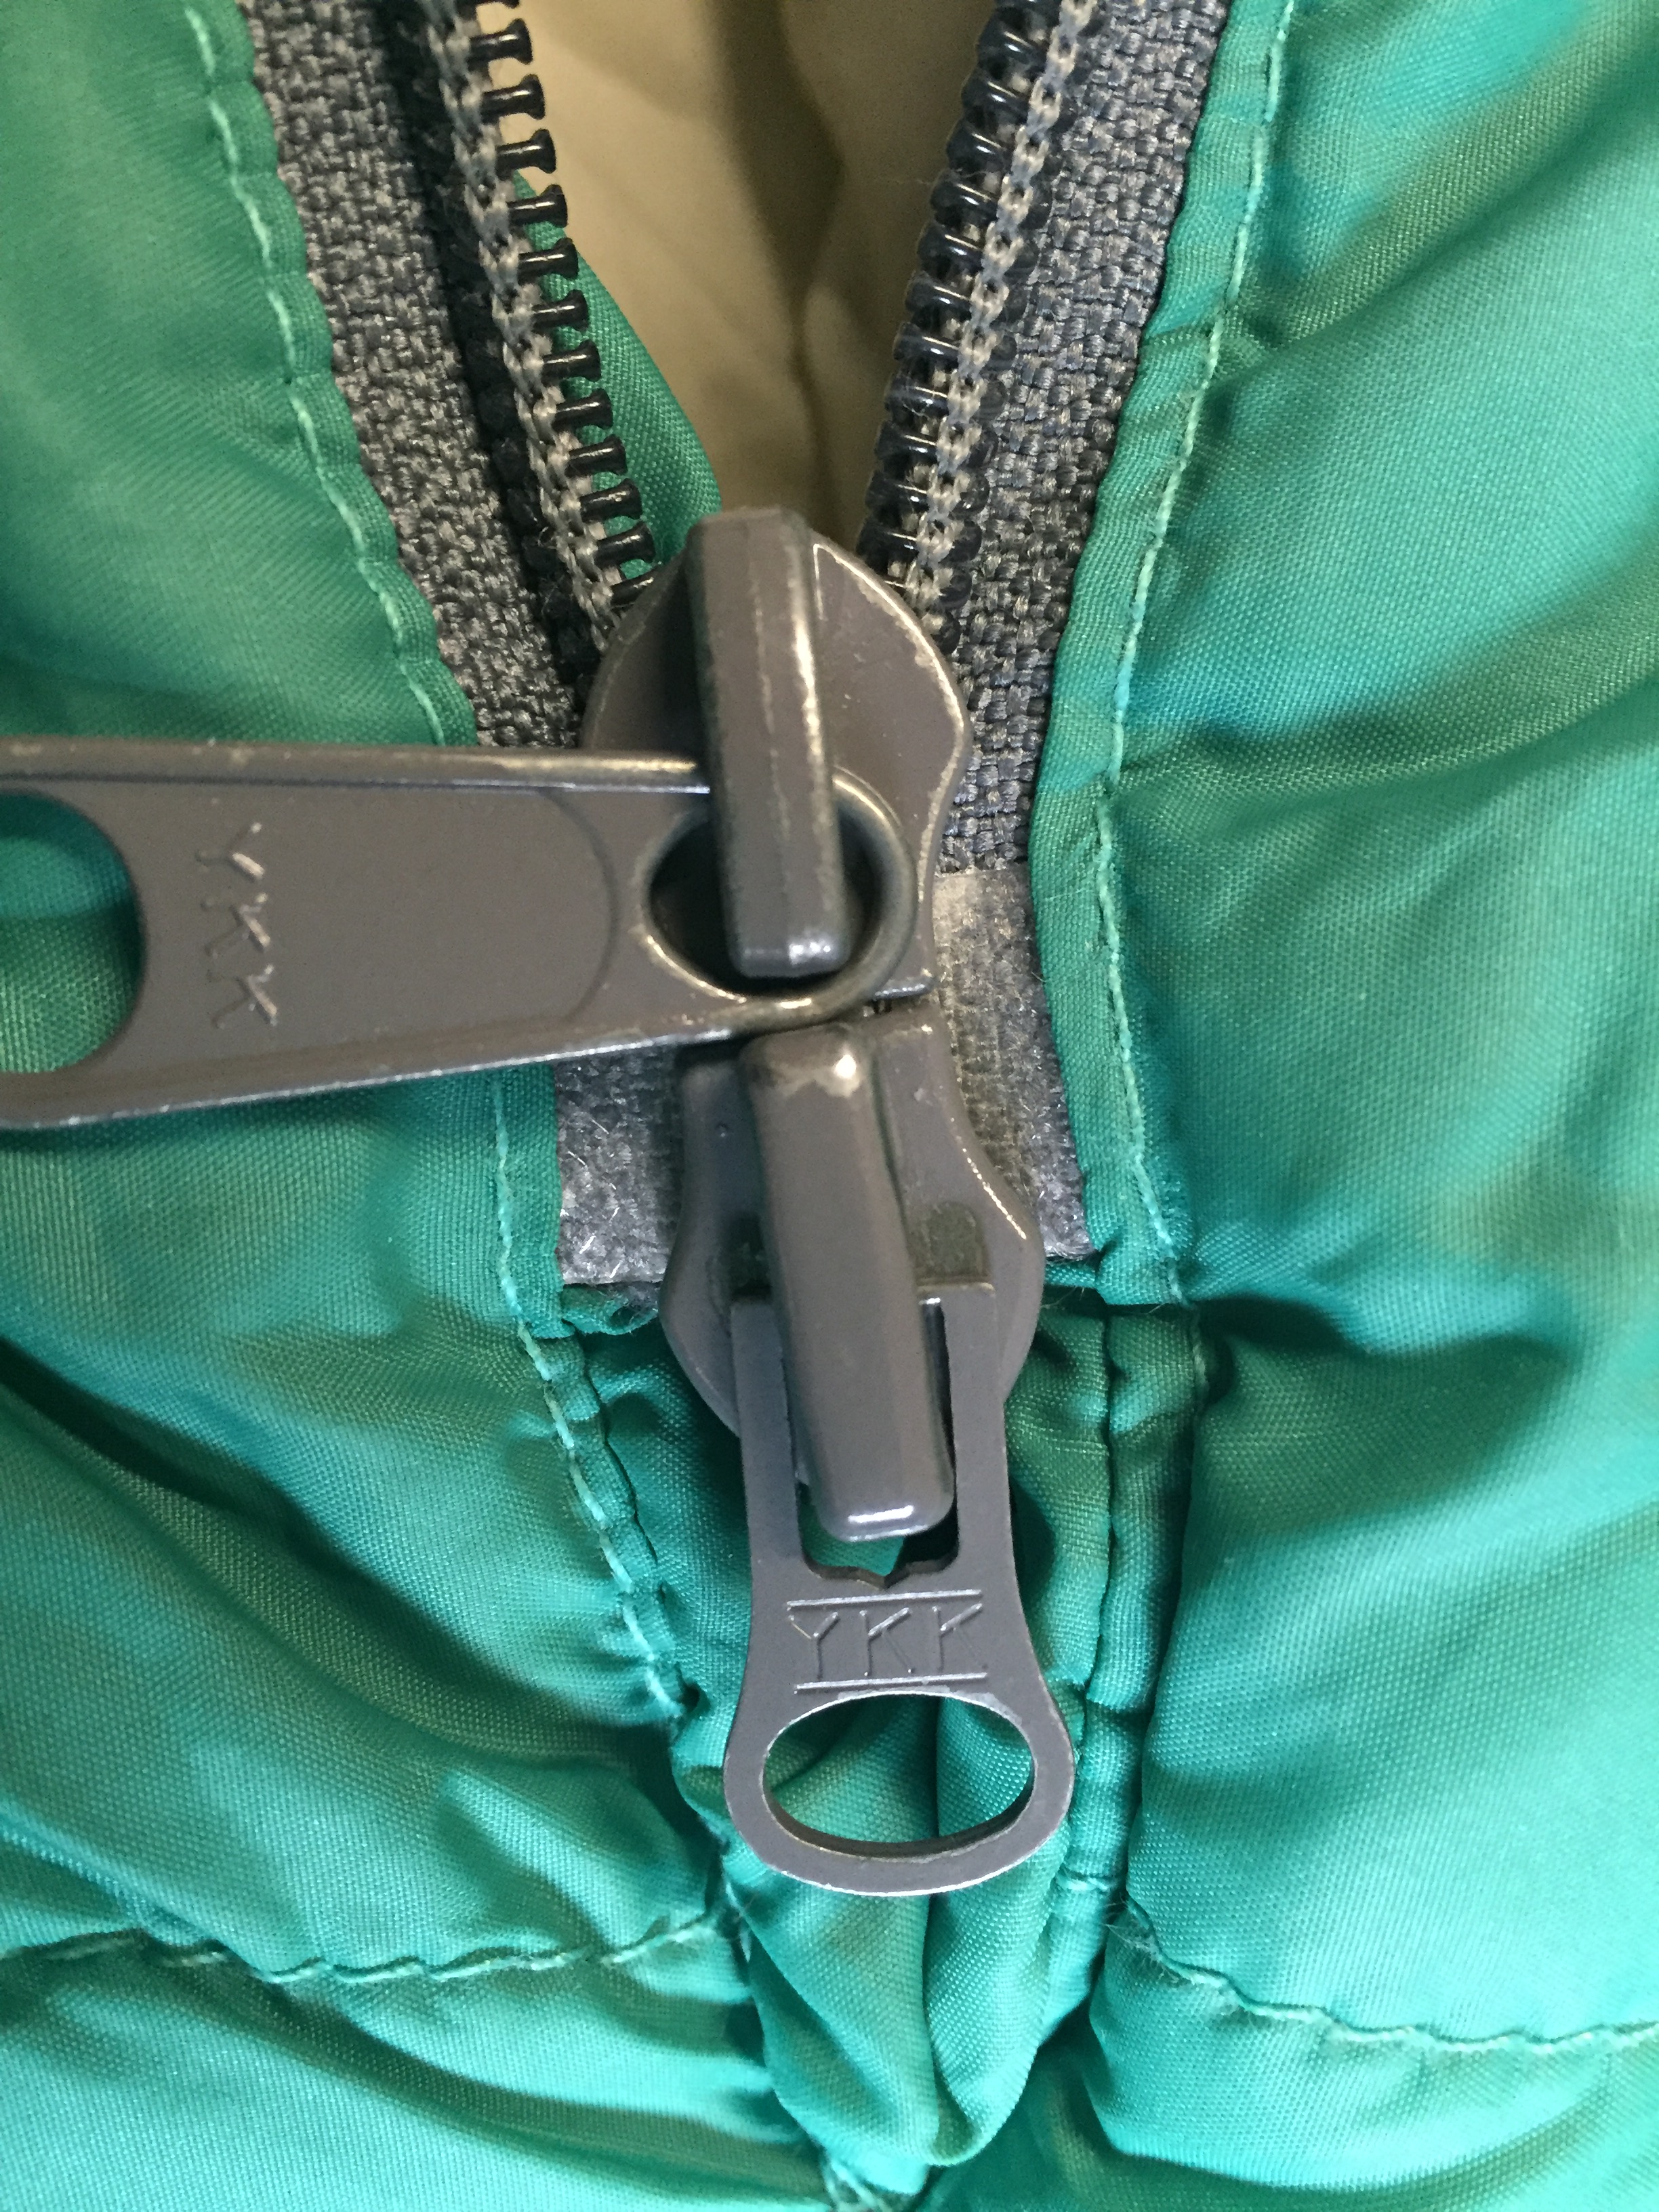 What is the point of a two-way zipper?